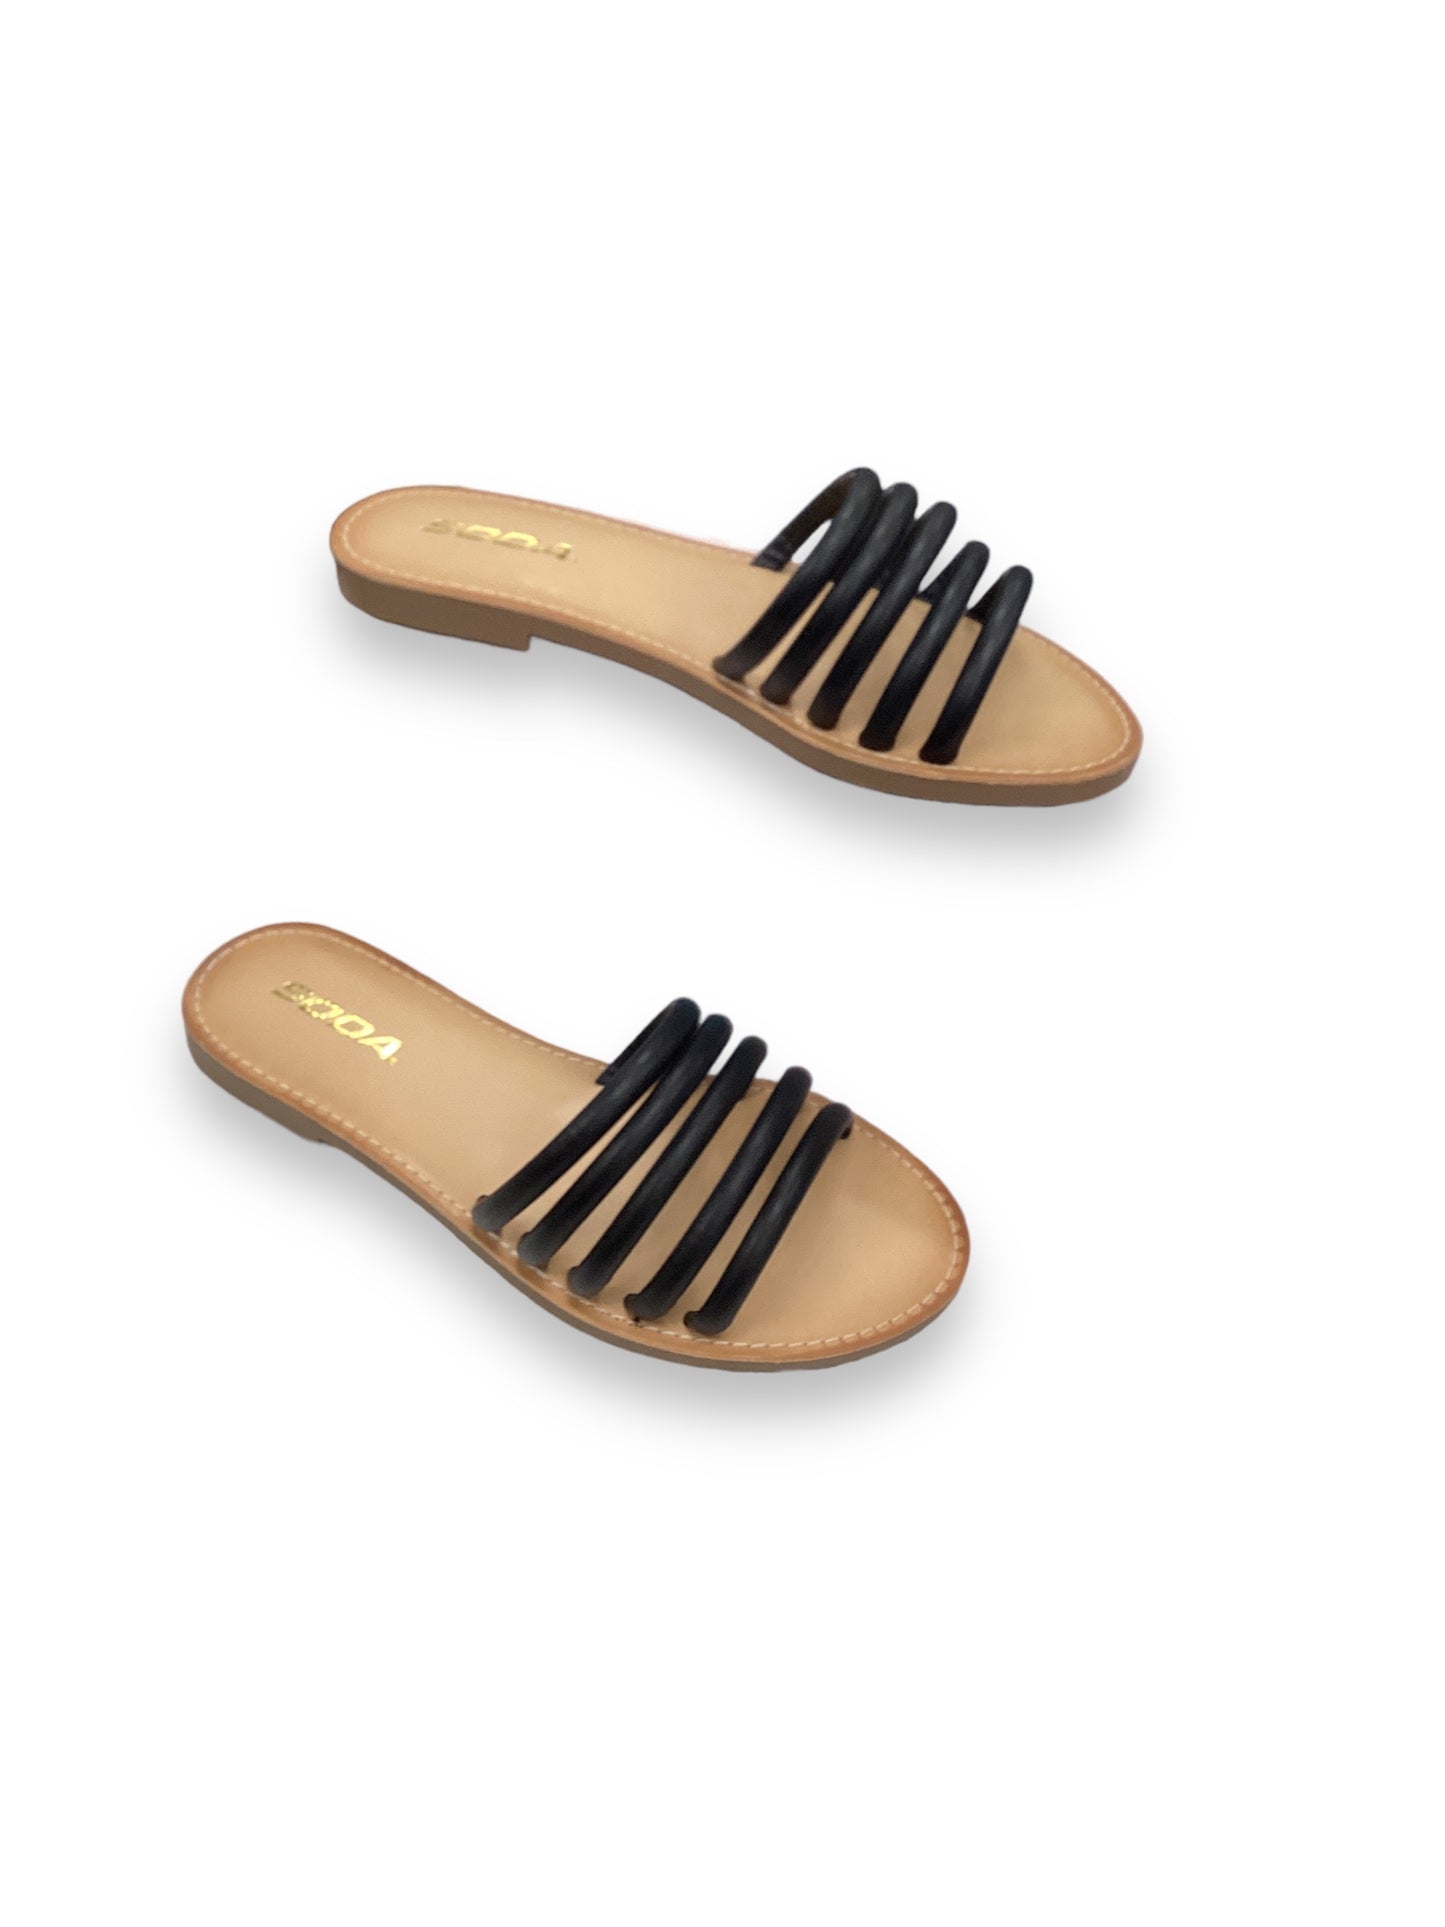 Sandals Flats By Soda  Size: 7.5